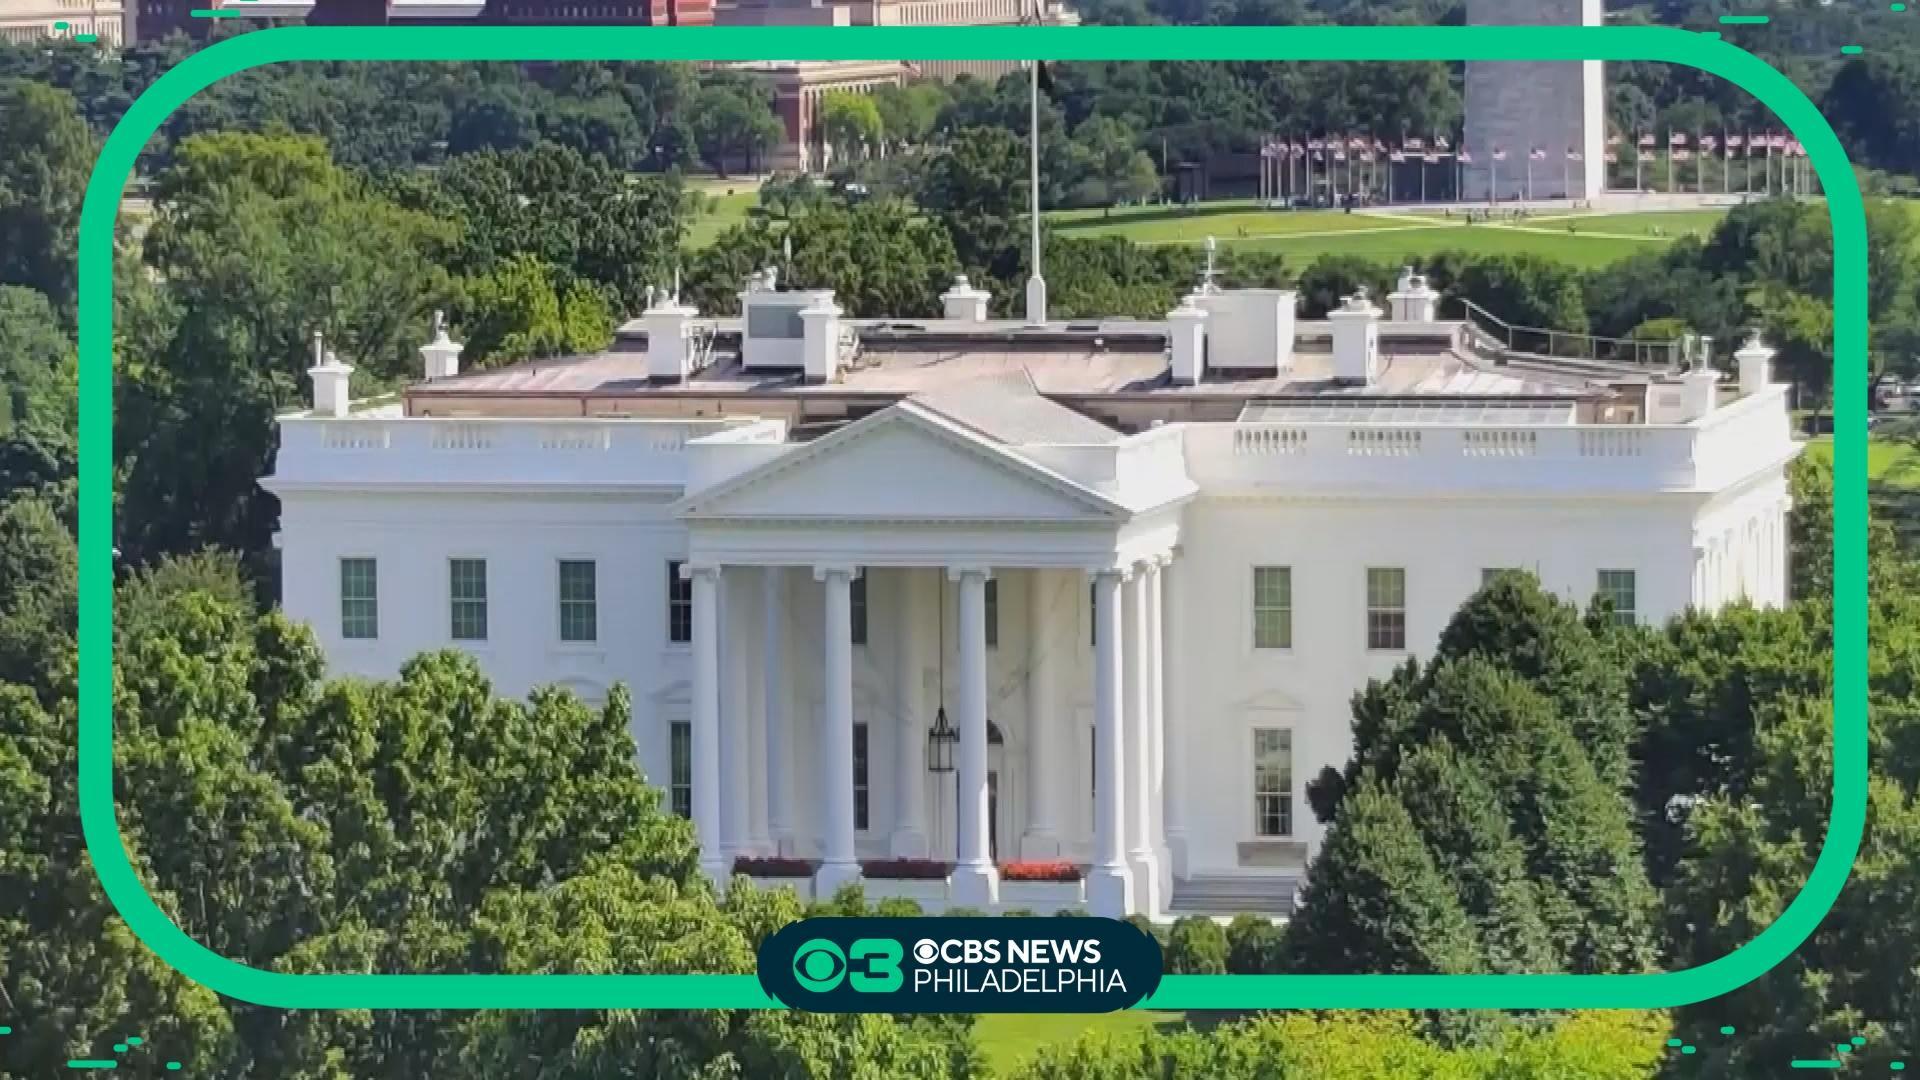 Substance found in White House confirmed to be cocaine - CBS Philadelphia